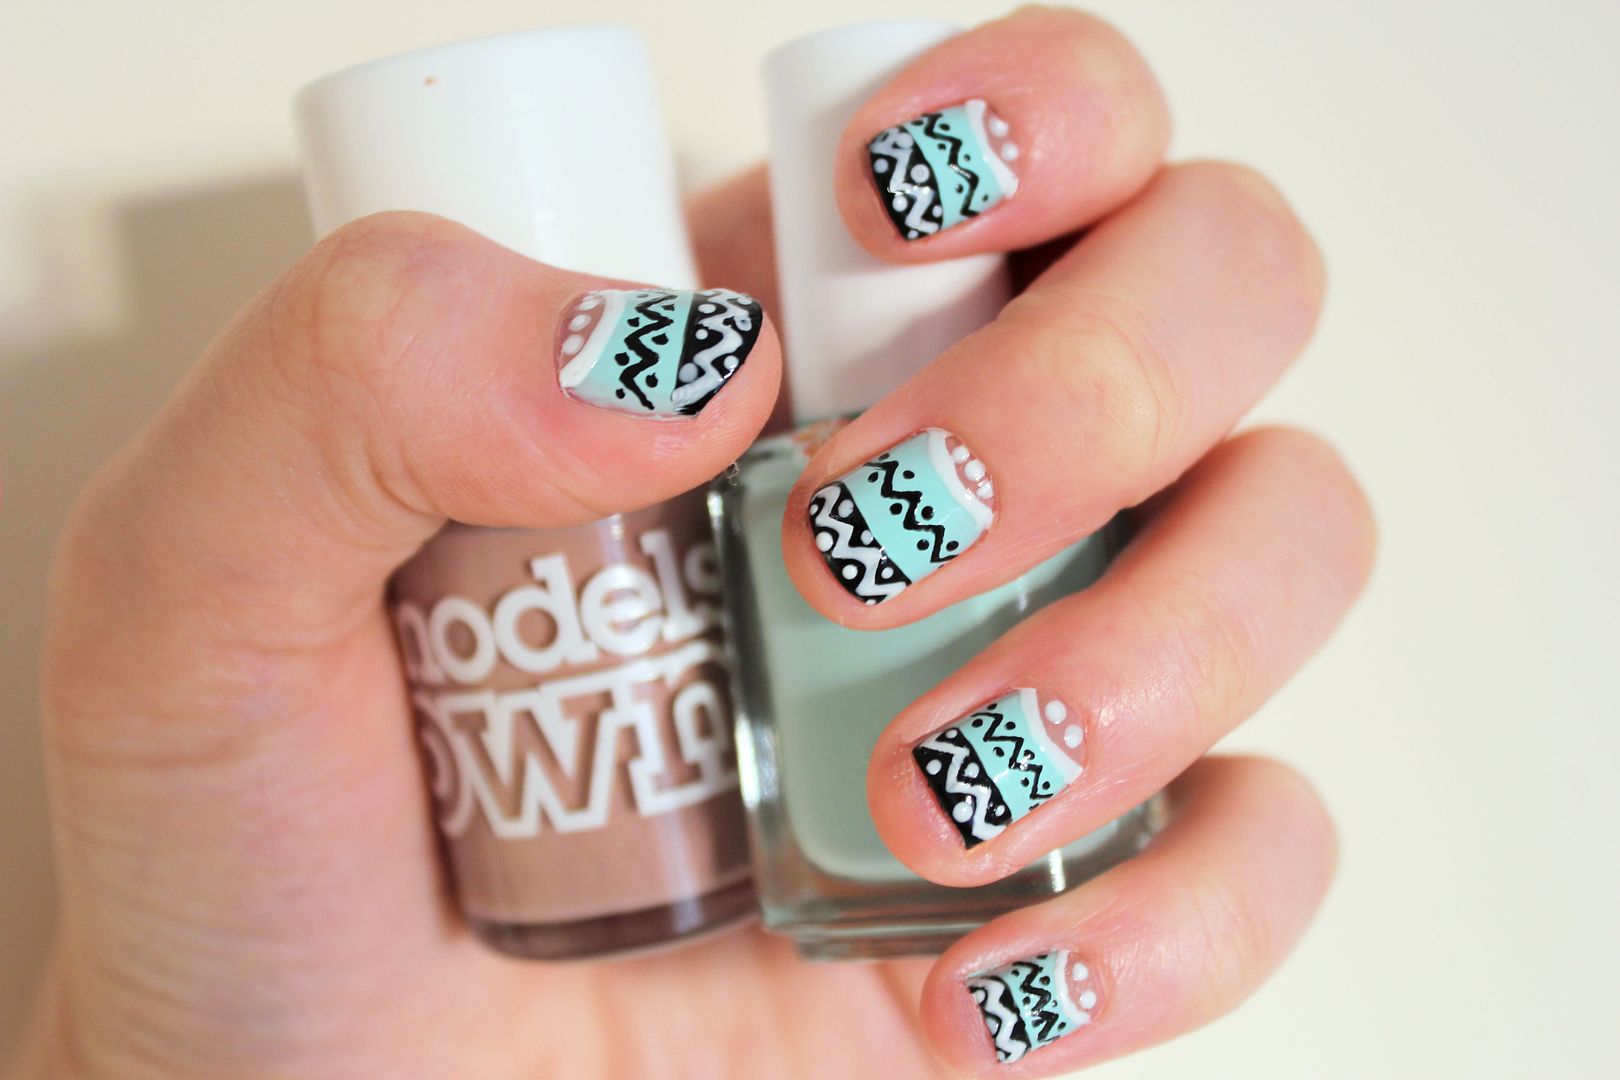 My first attempt at Aztec nails, a trend that seems to be everywhere at the